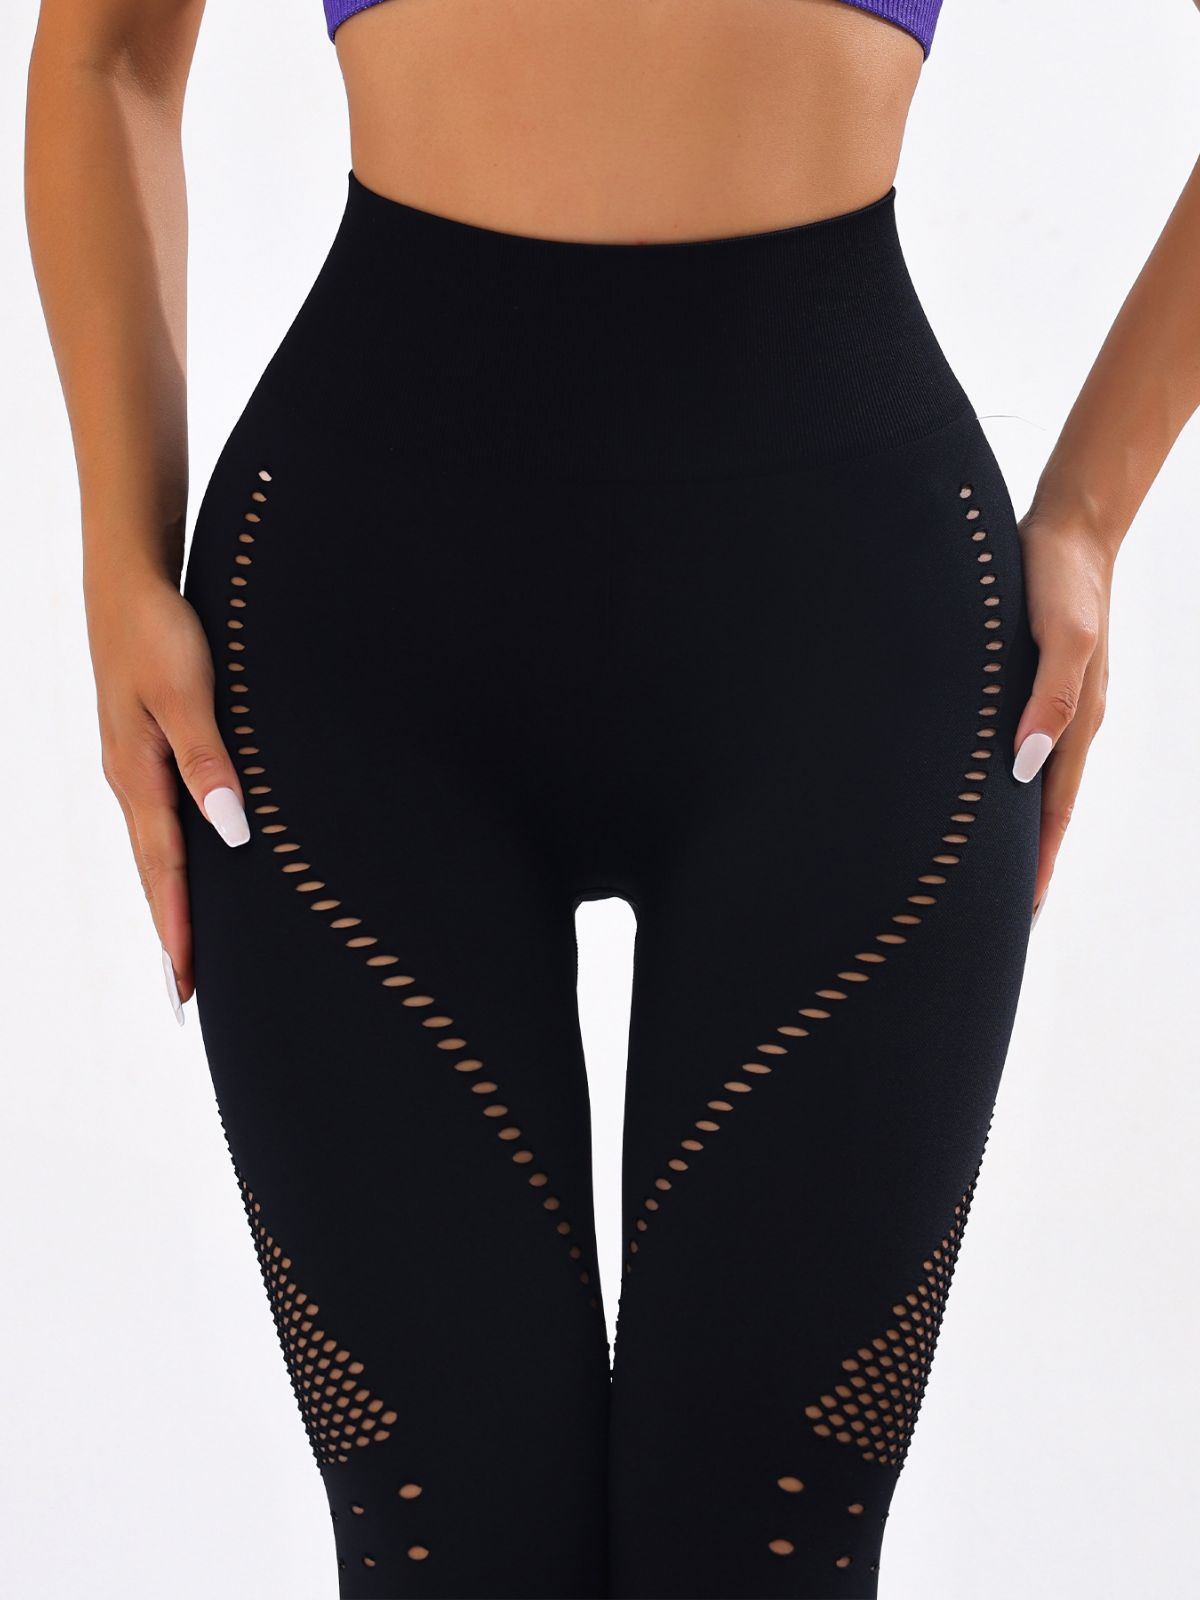 European and American Quick-Drying High Waist Hip Lift Yoga Pants Women's New Mesh Belly Contracting Sports Safety Pants Peach Hip Fitness Trousers